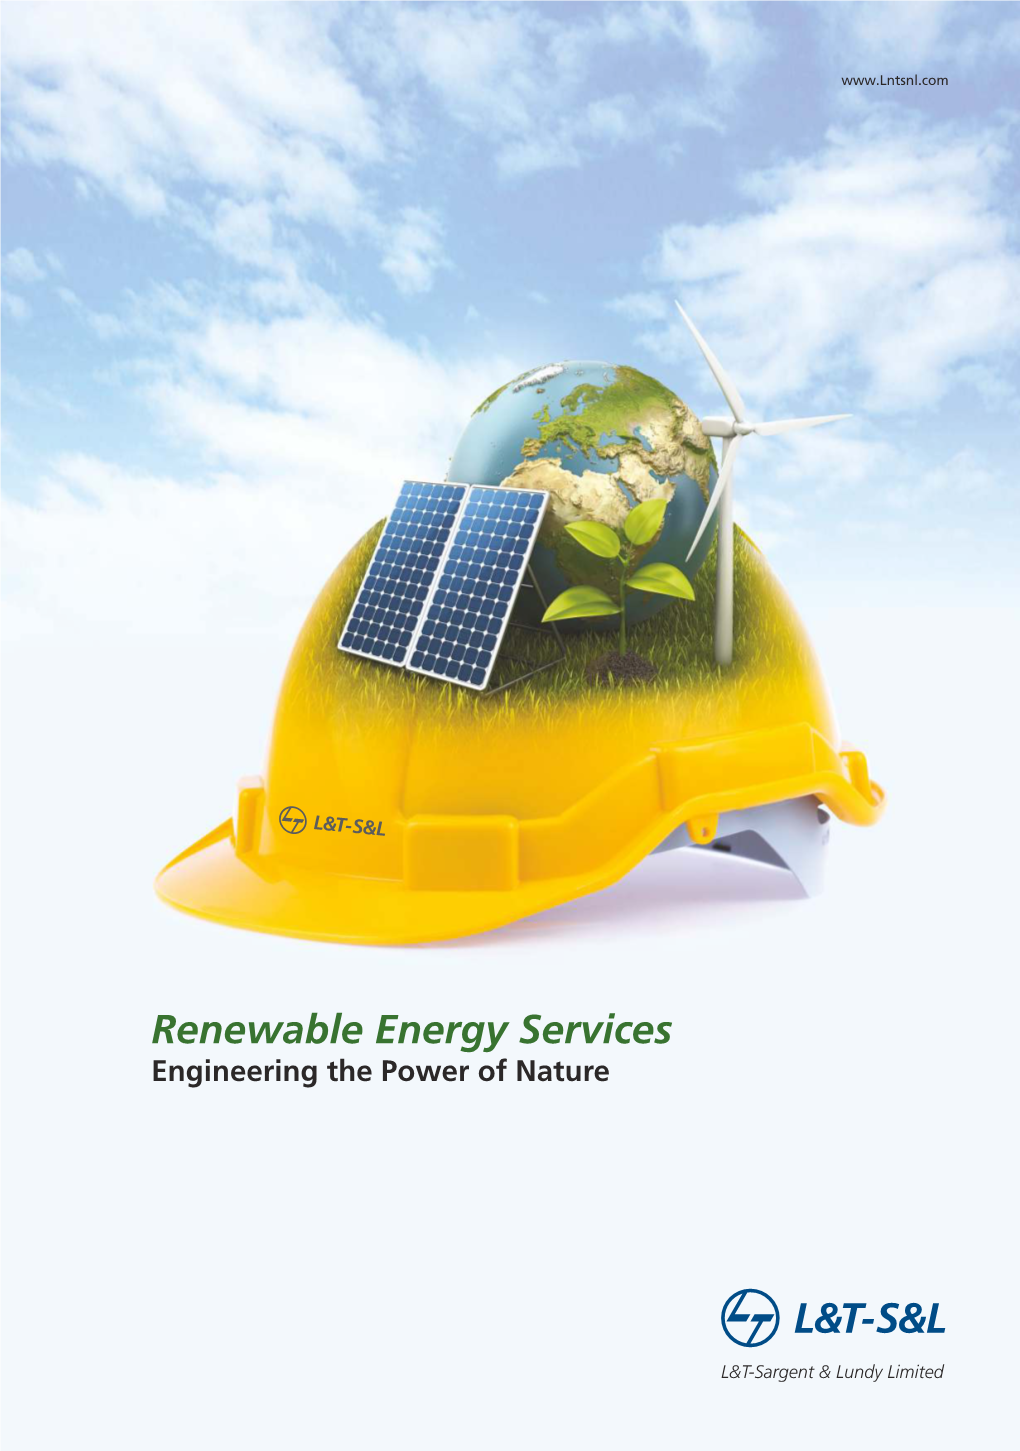 Renewable Energy Services Renovation and Modernisation AQCS Consulting Services the Power of Nature Joint Venture Partners – the Power of Two